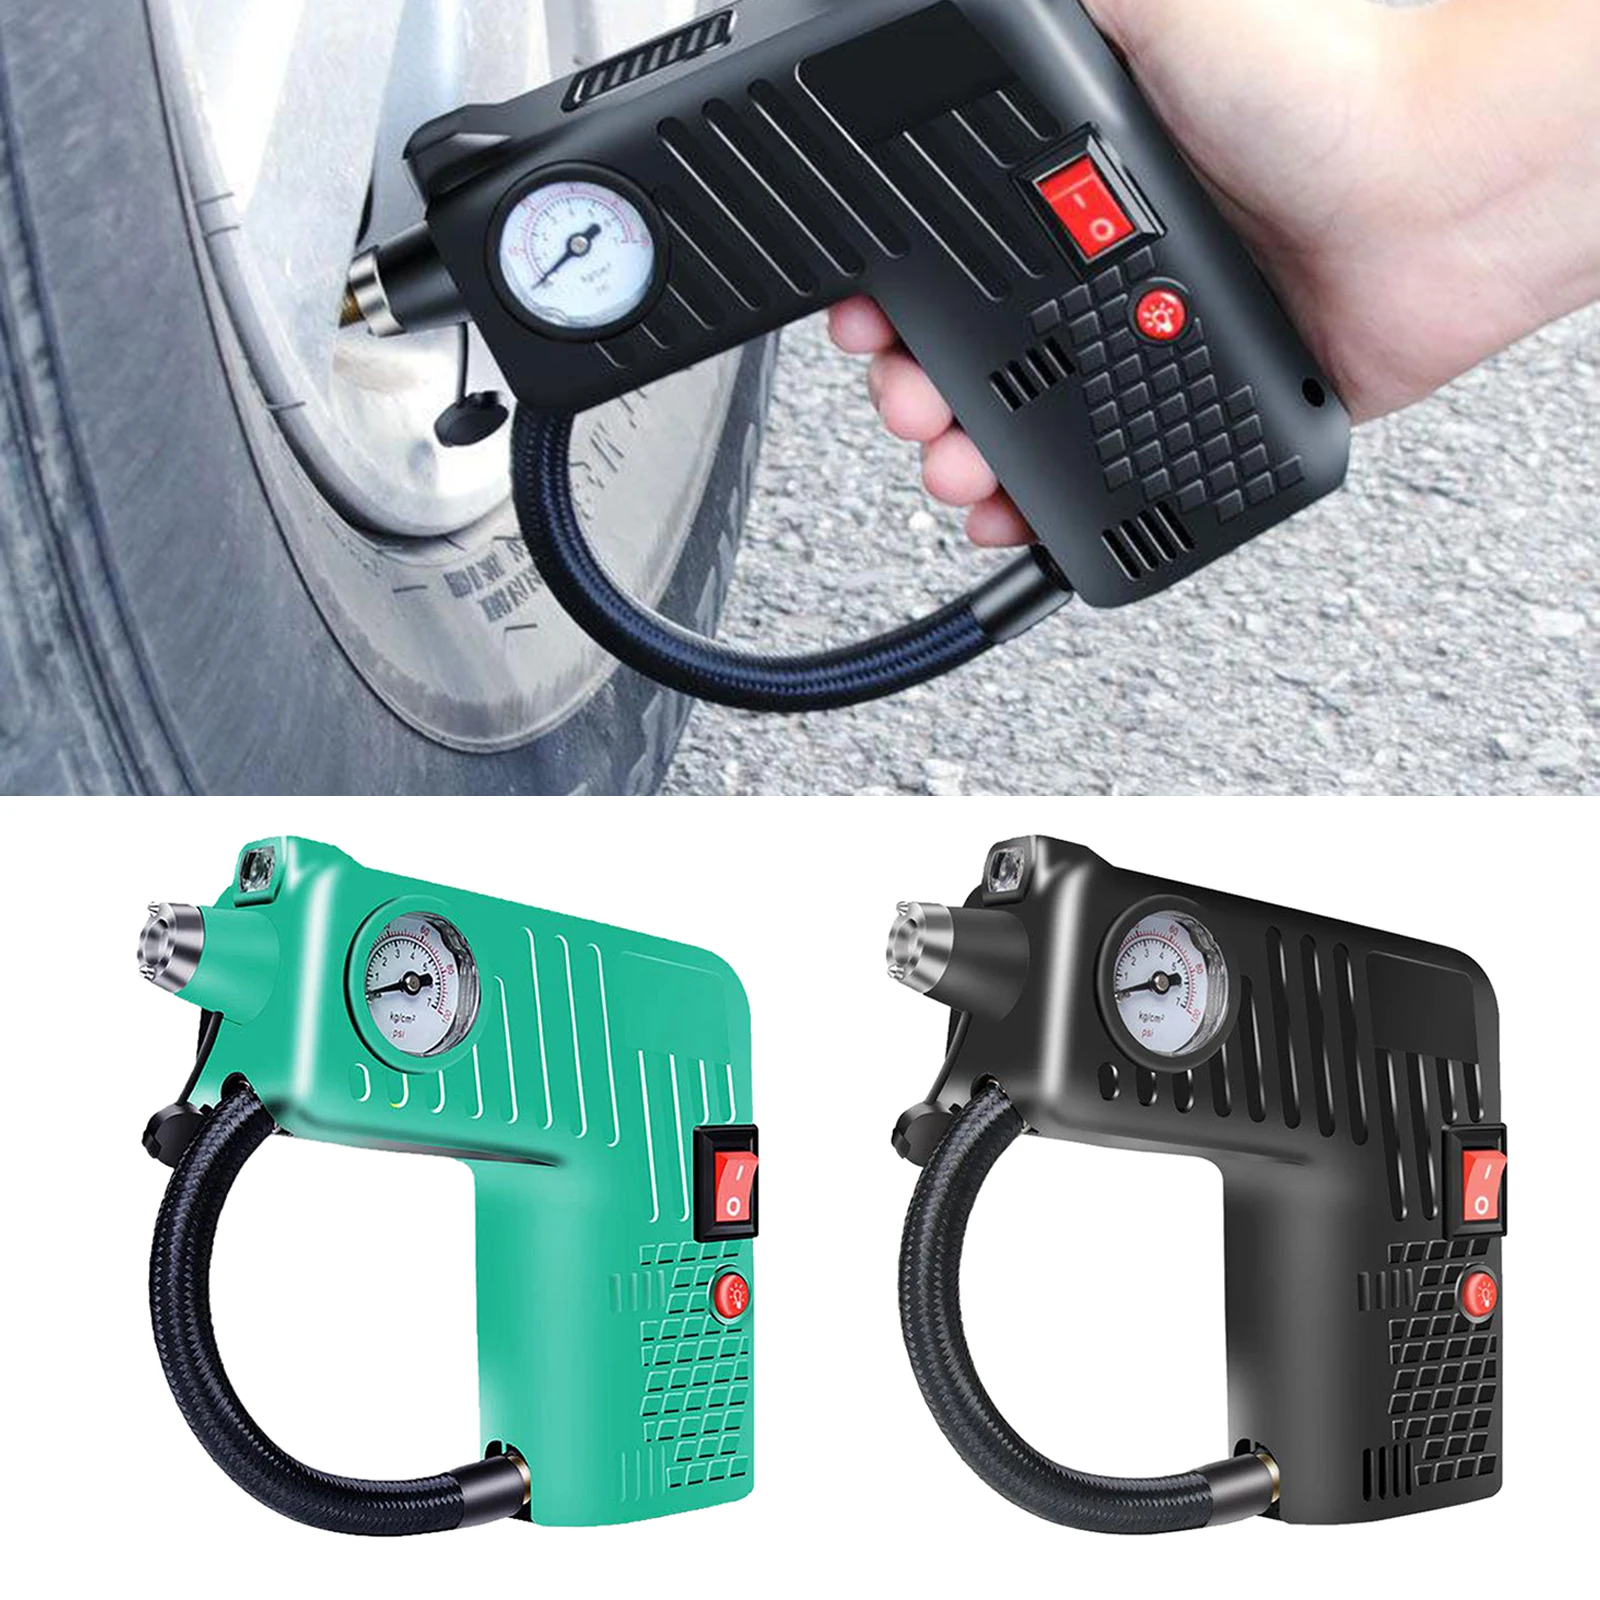 Portable Air Compressor Tire Inflator AC/DC Electric Pump ,with Pressure gauge, Air pump for Car Tires, Motorcycle, Bike